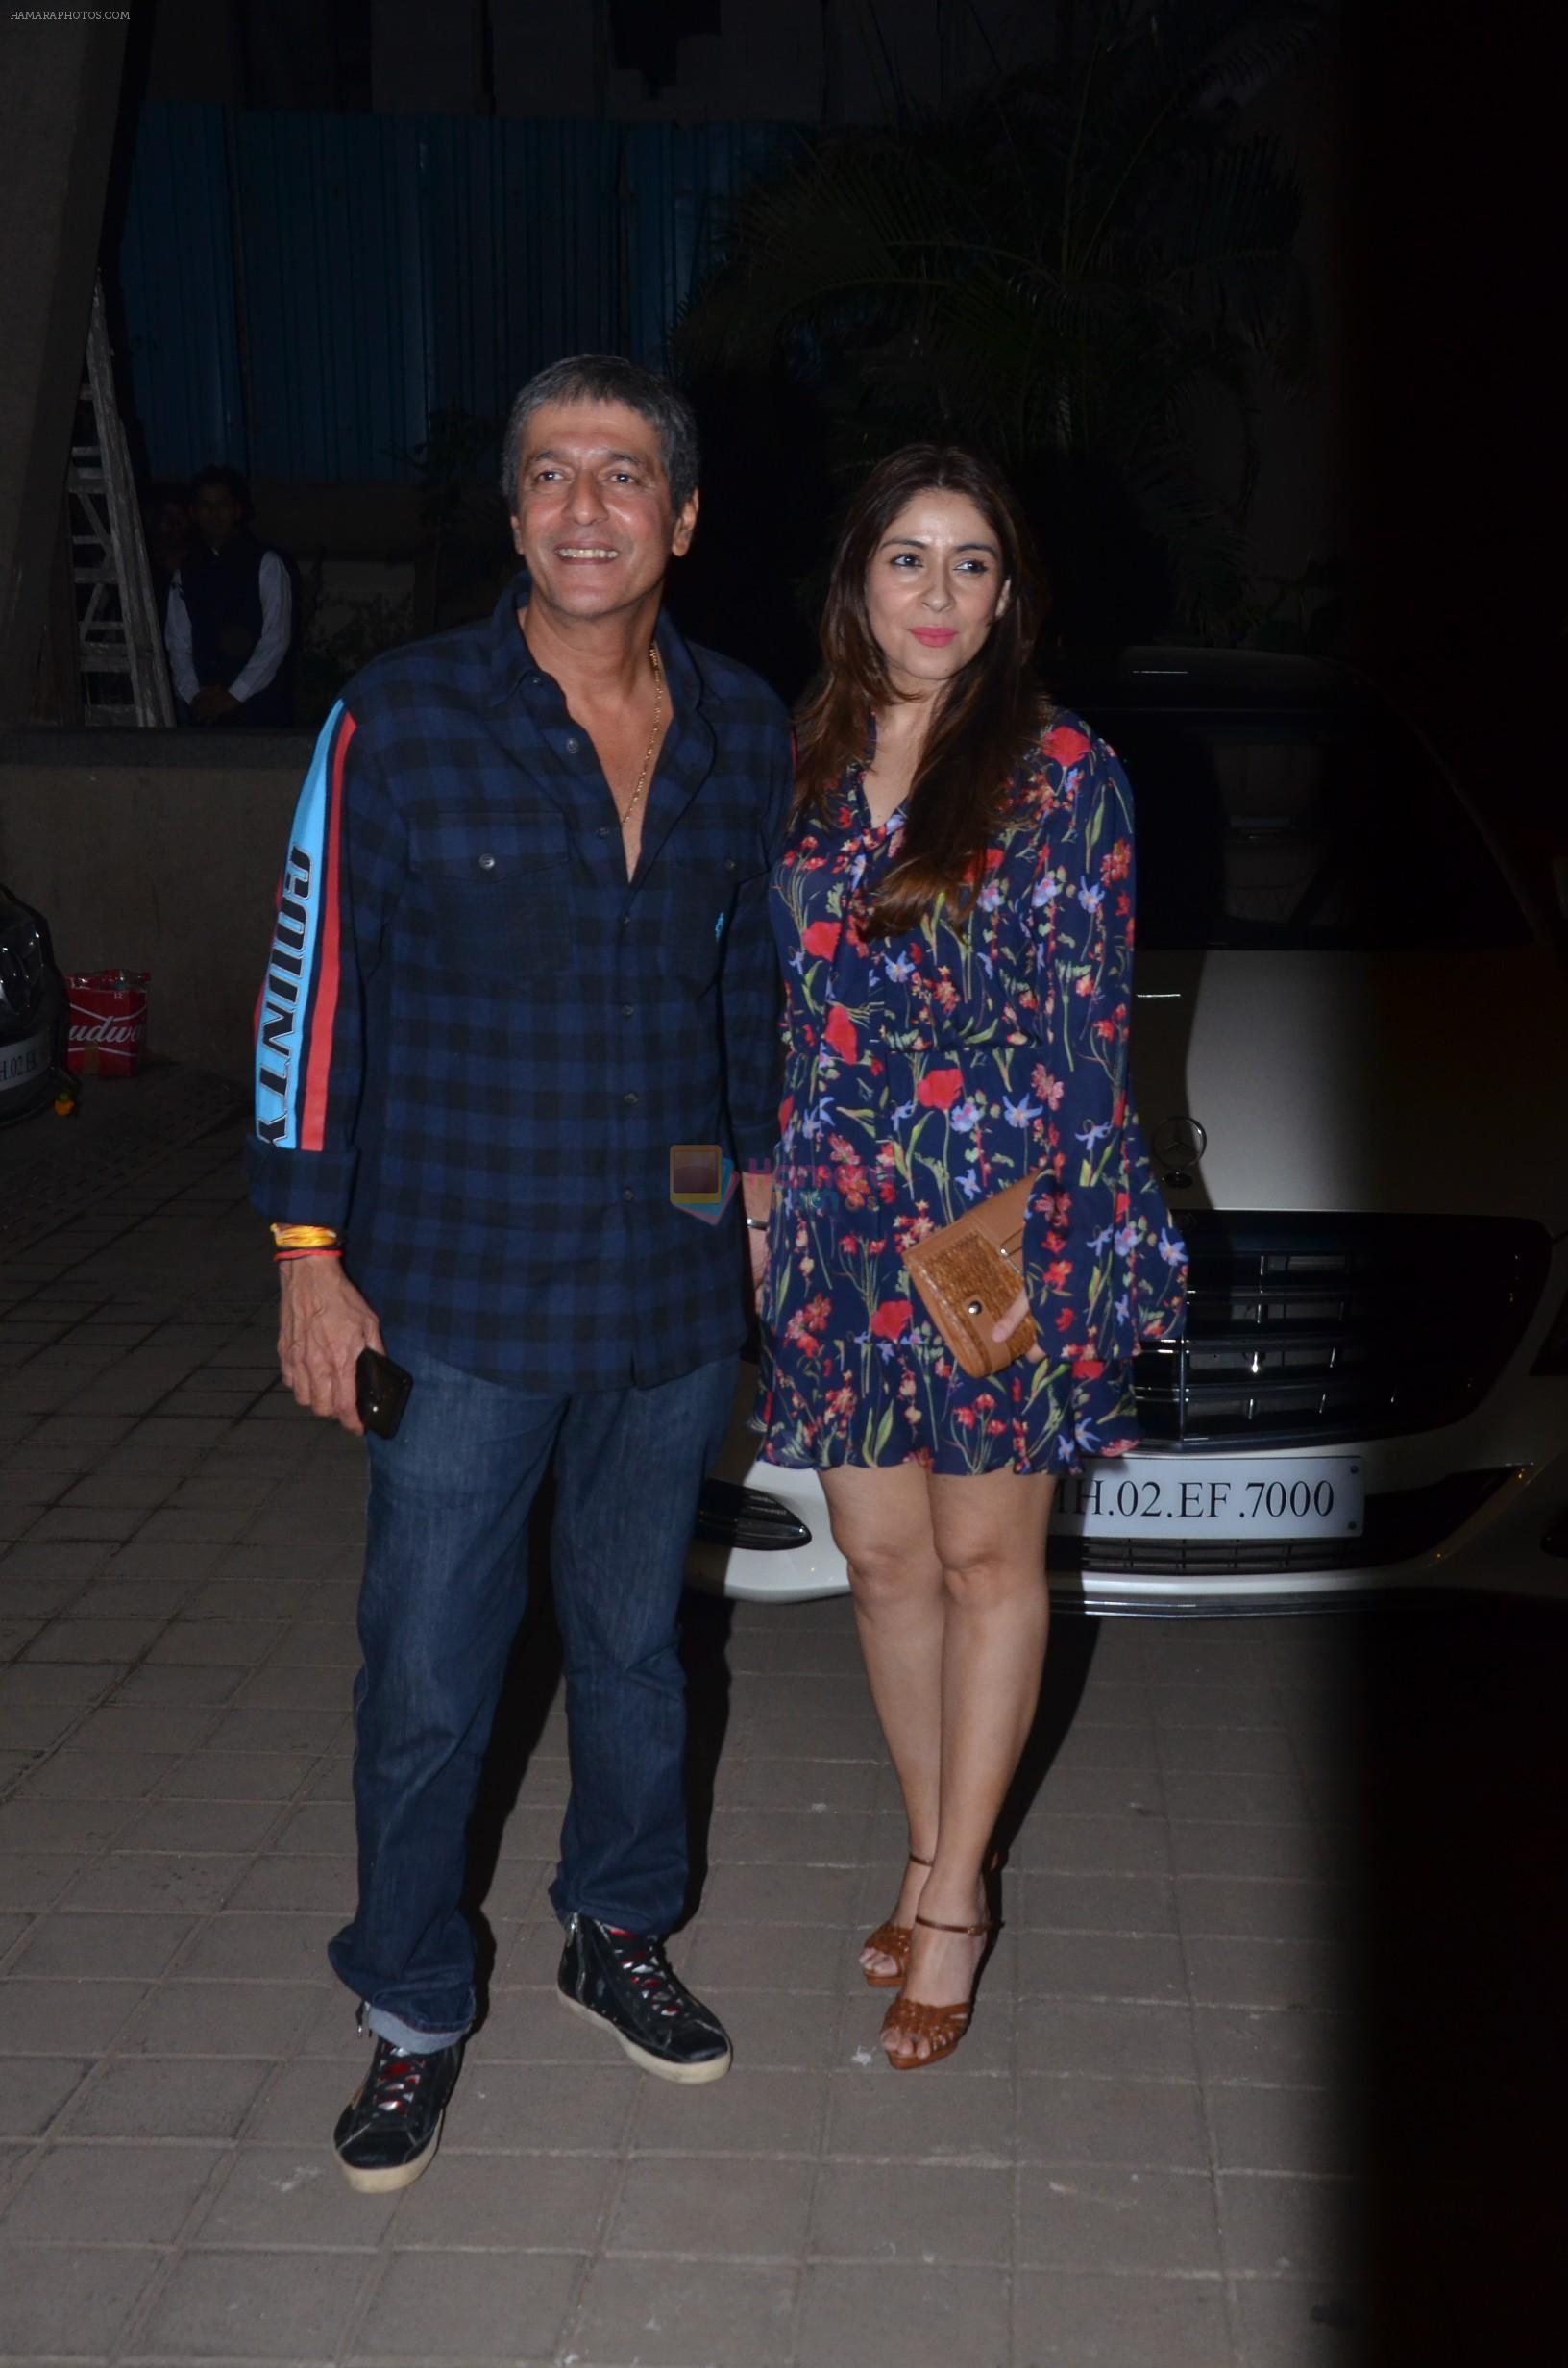 Chunky Pandey at Punit Malhotra's Party in Bandra on 20th Jan 2019